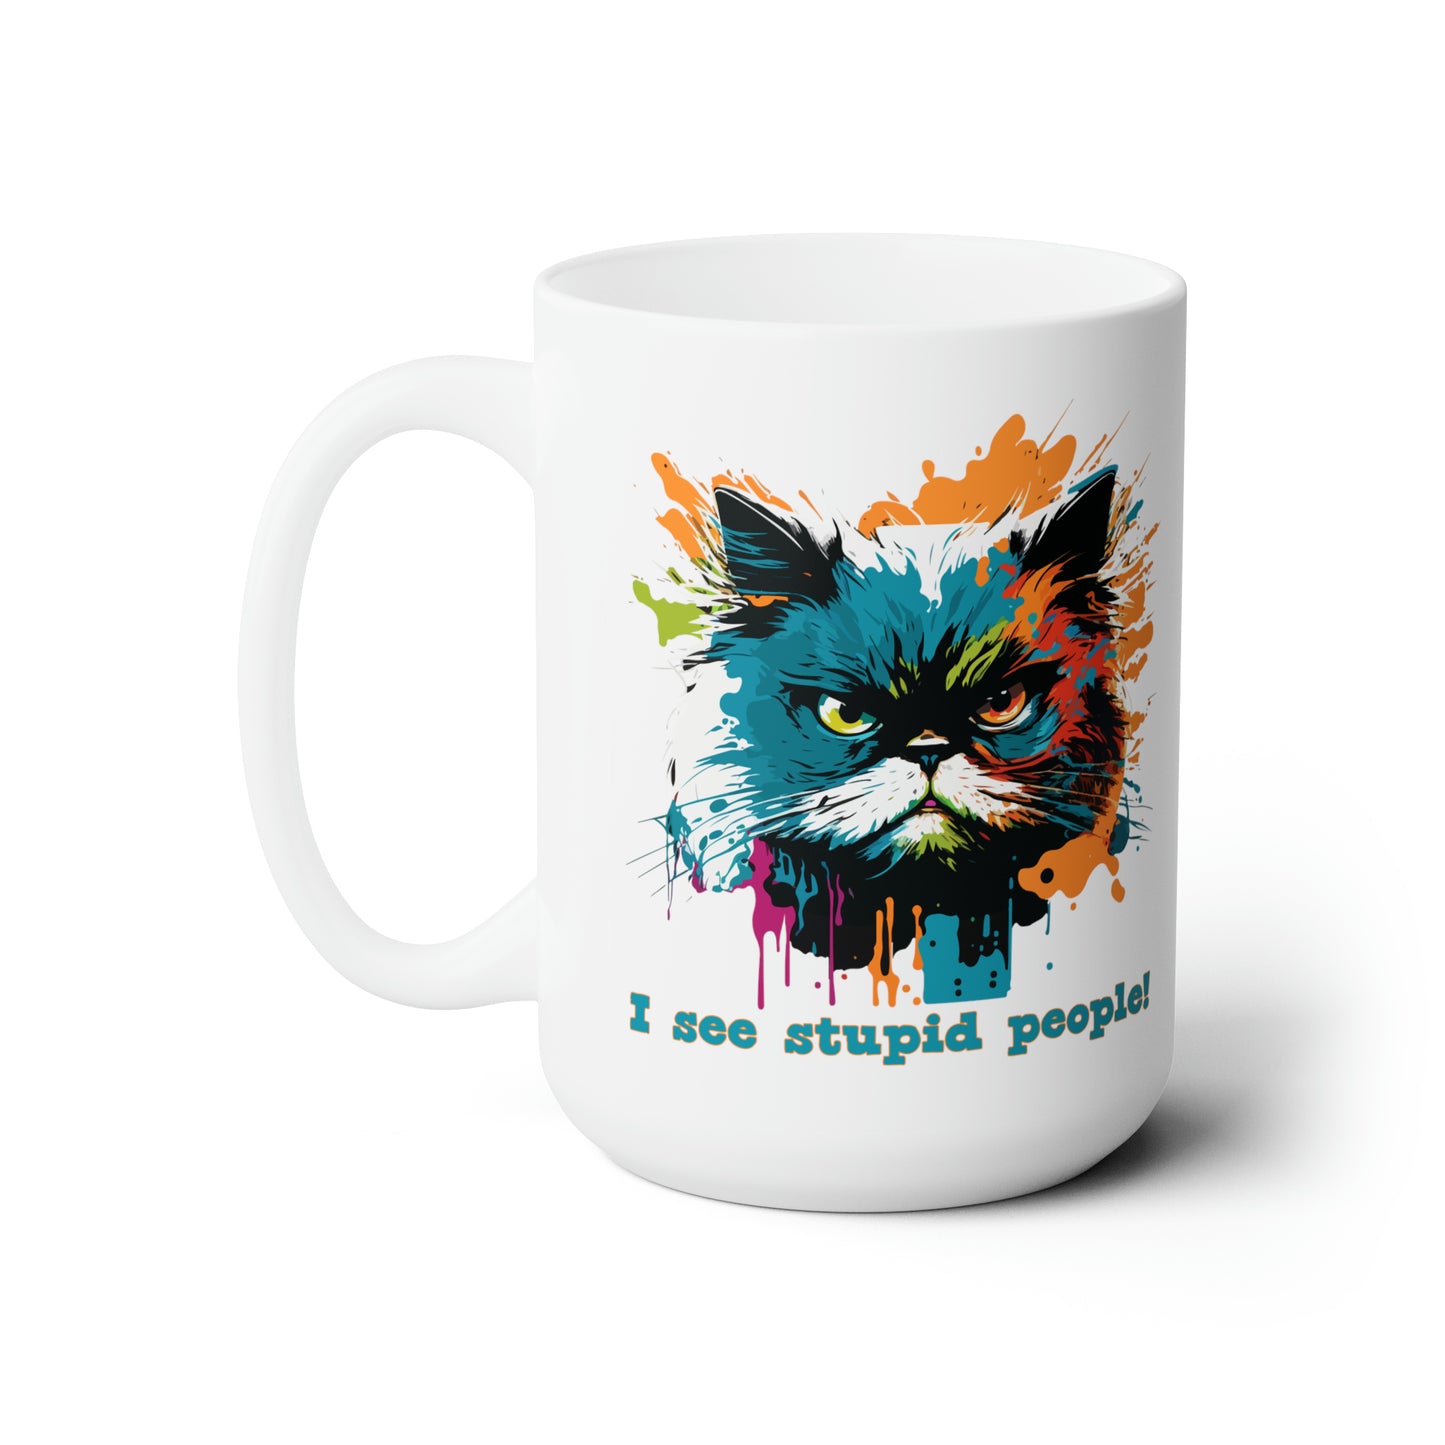 Sarcastic Cat Mug For Stupid People Hot Tea Cup For Funny Feline Gift